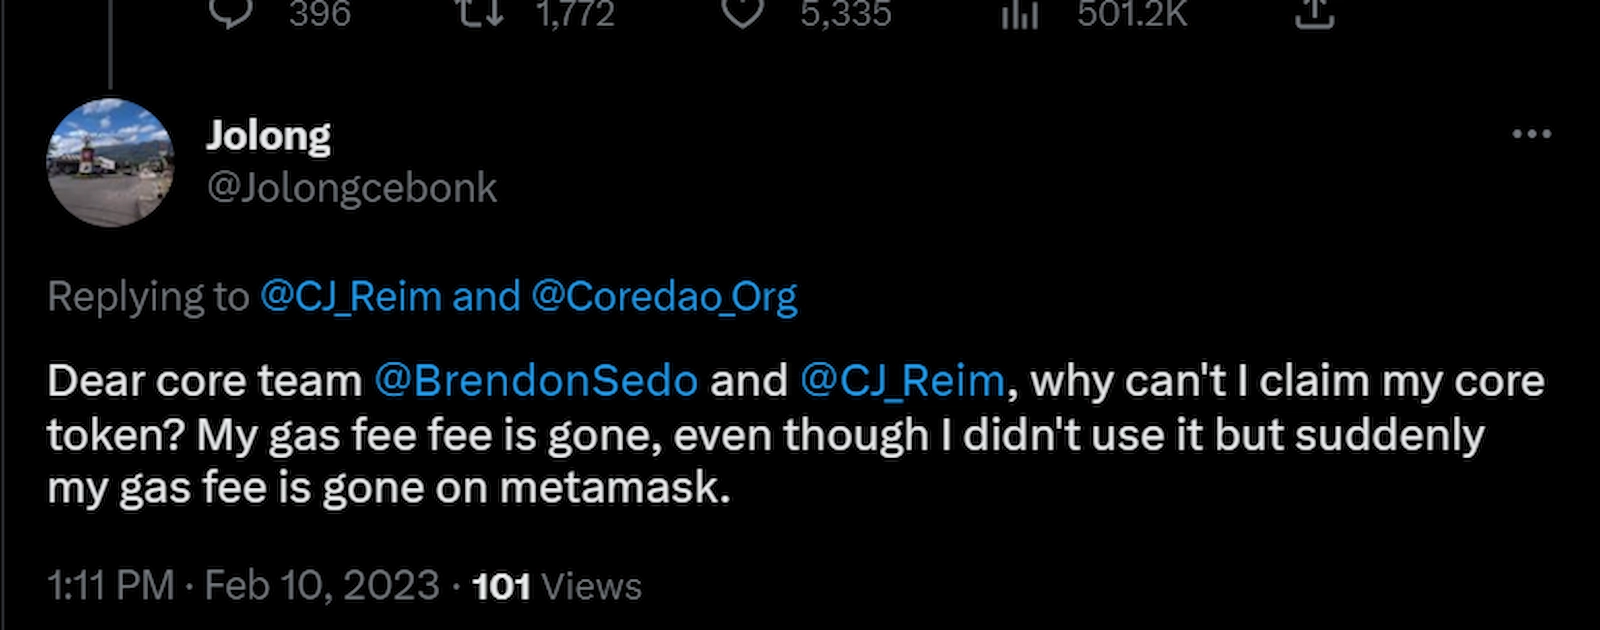 Users took to Twitter to complain about glitches in MetaMask.